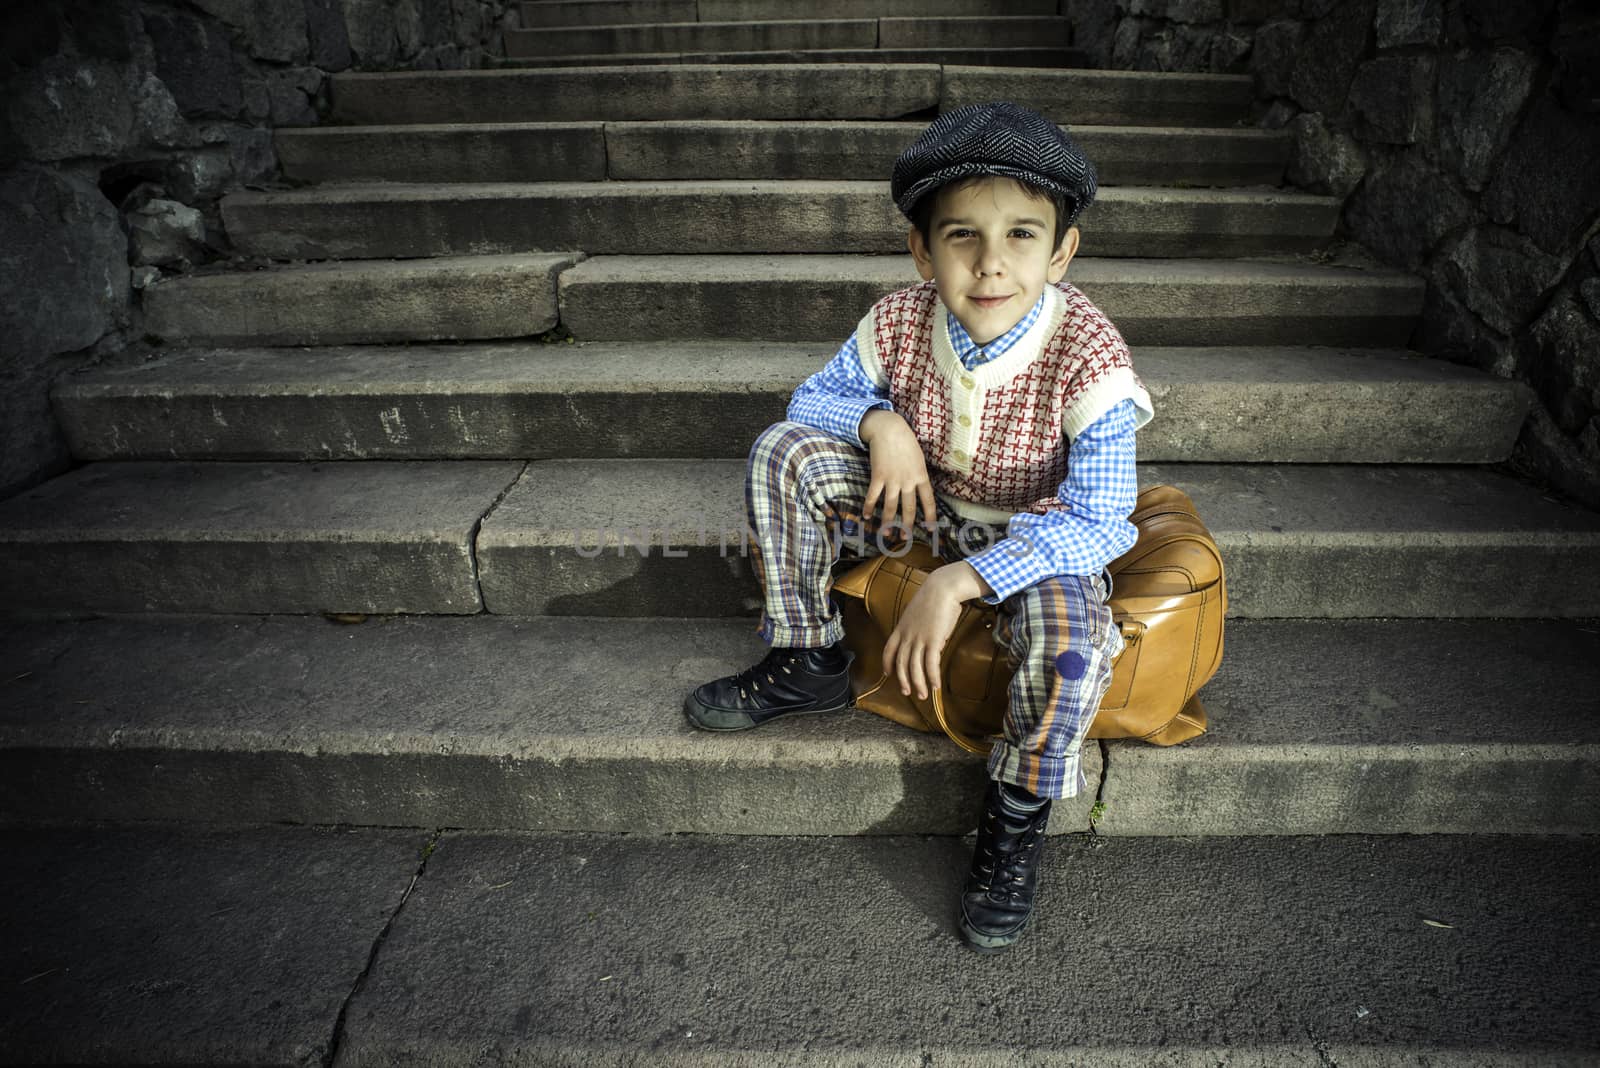 Exterior stairs and child with vintage bag. Vintage clothes style